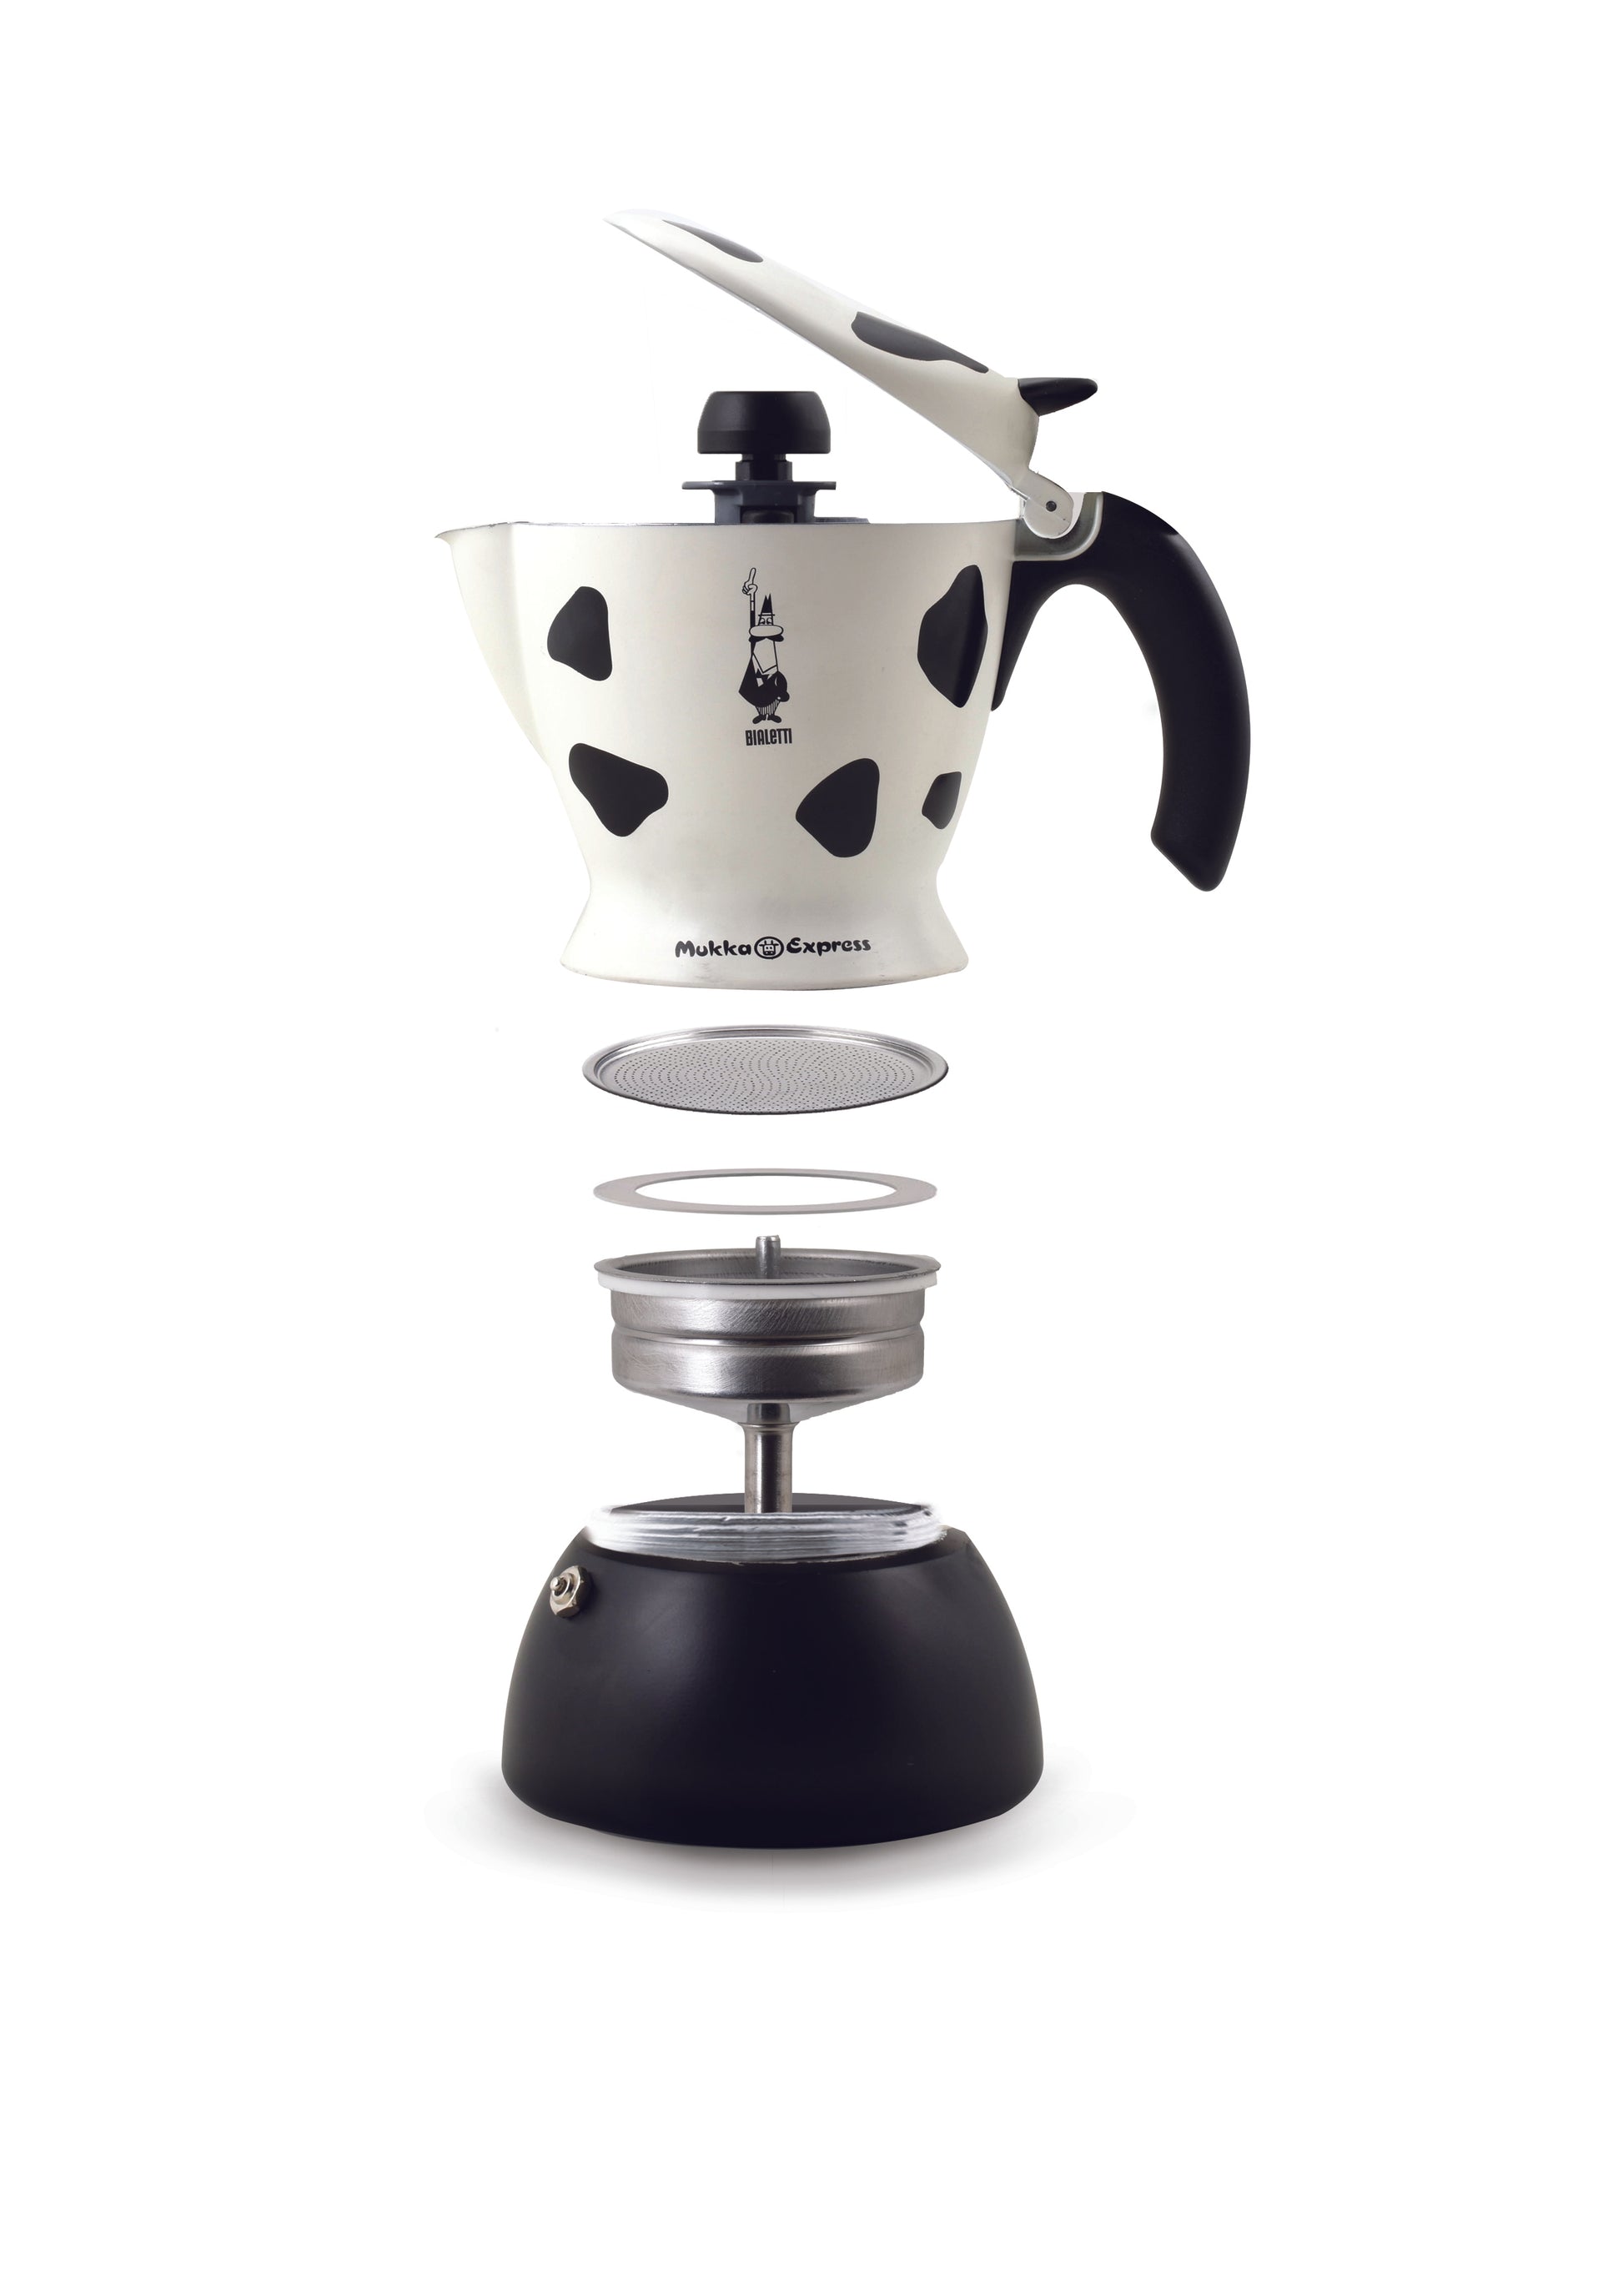 I think the best small coffee maker is bialetti